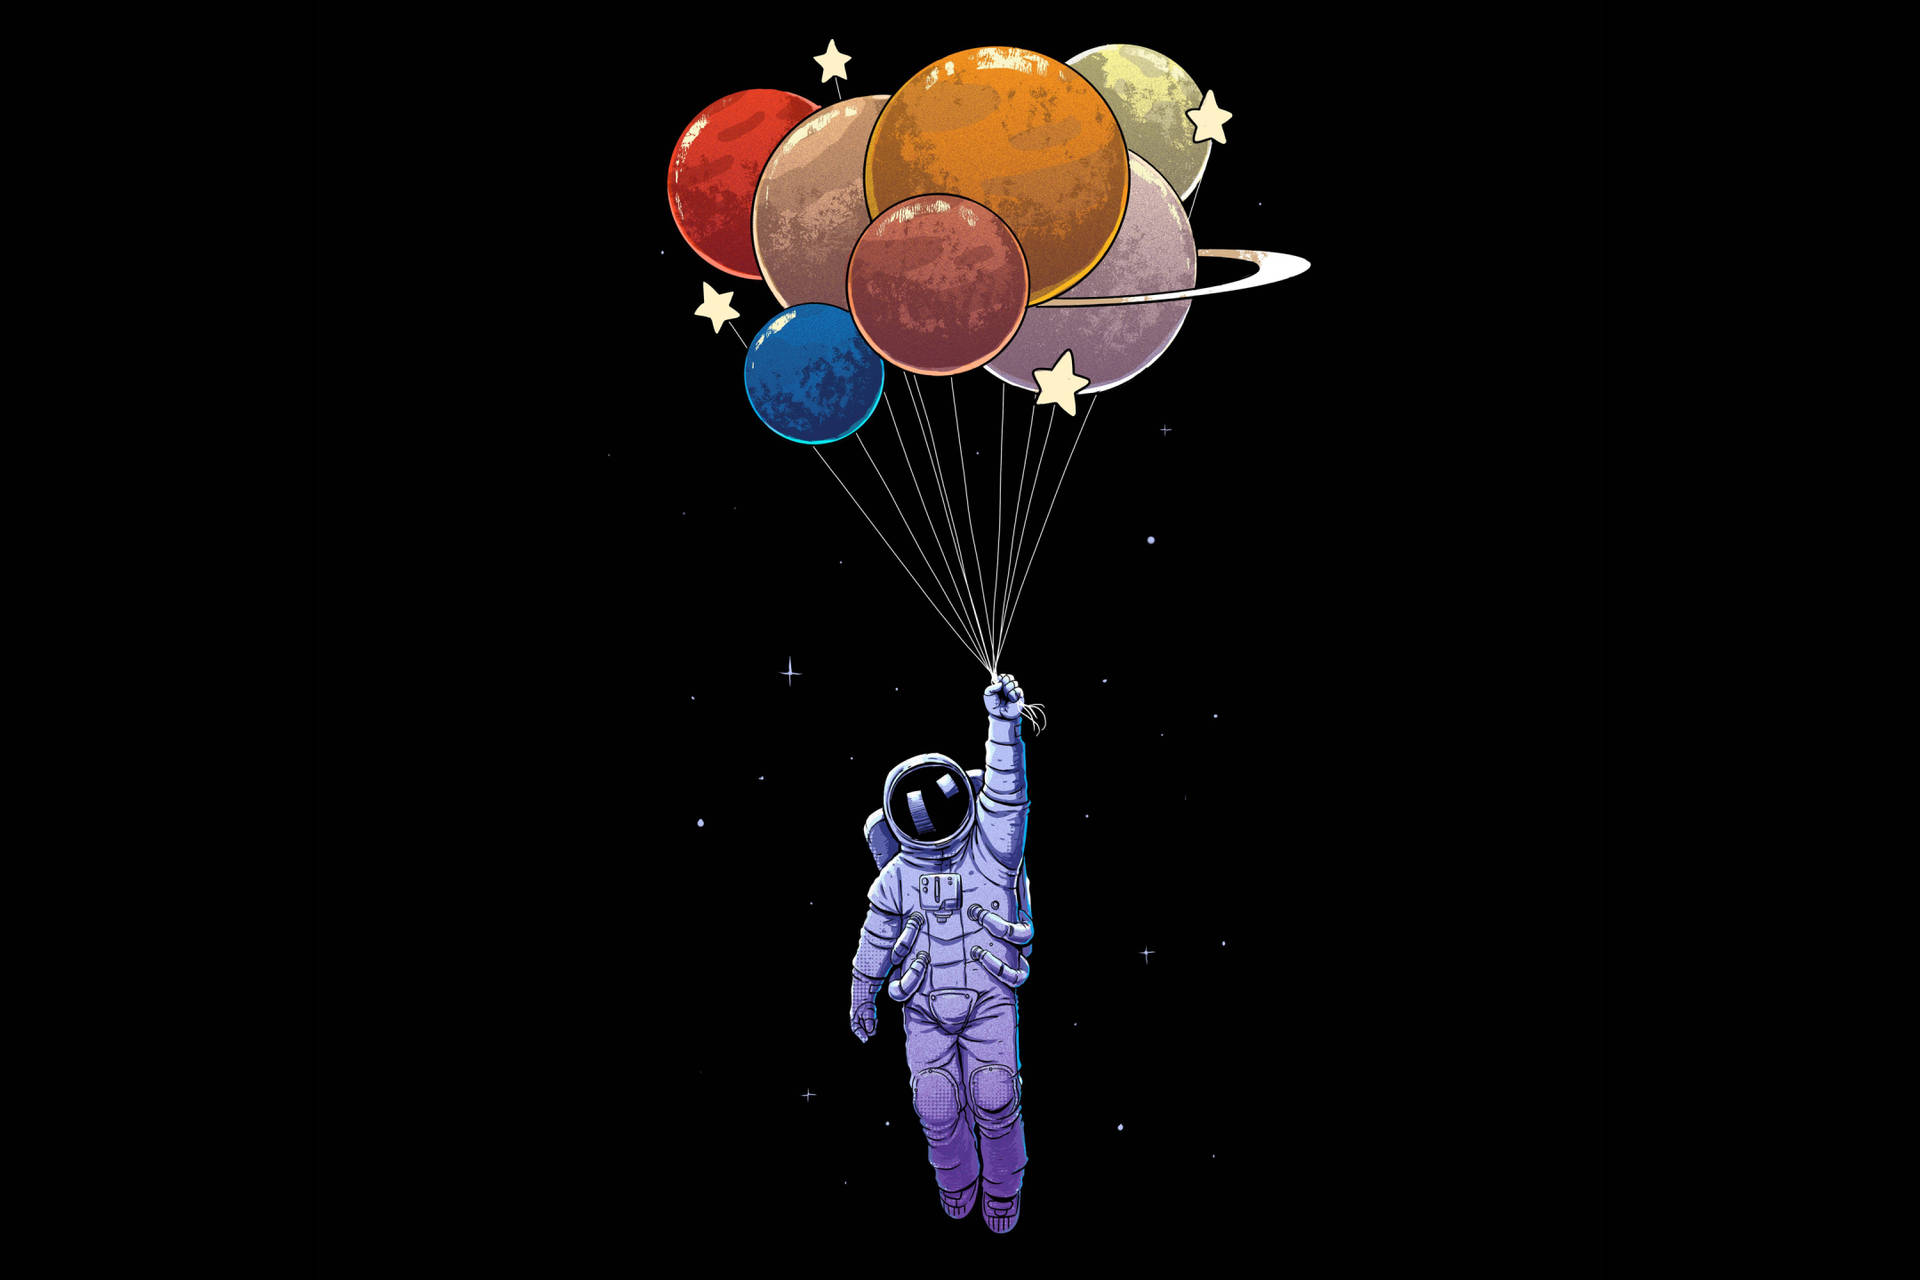 Astronaut With Balloons Image Wallpaper